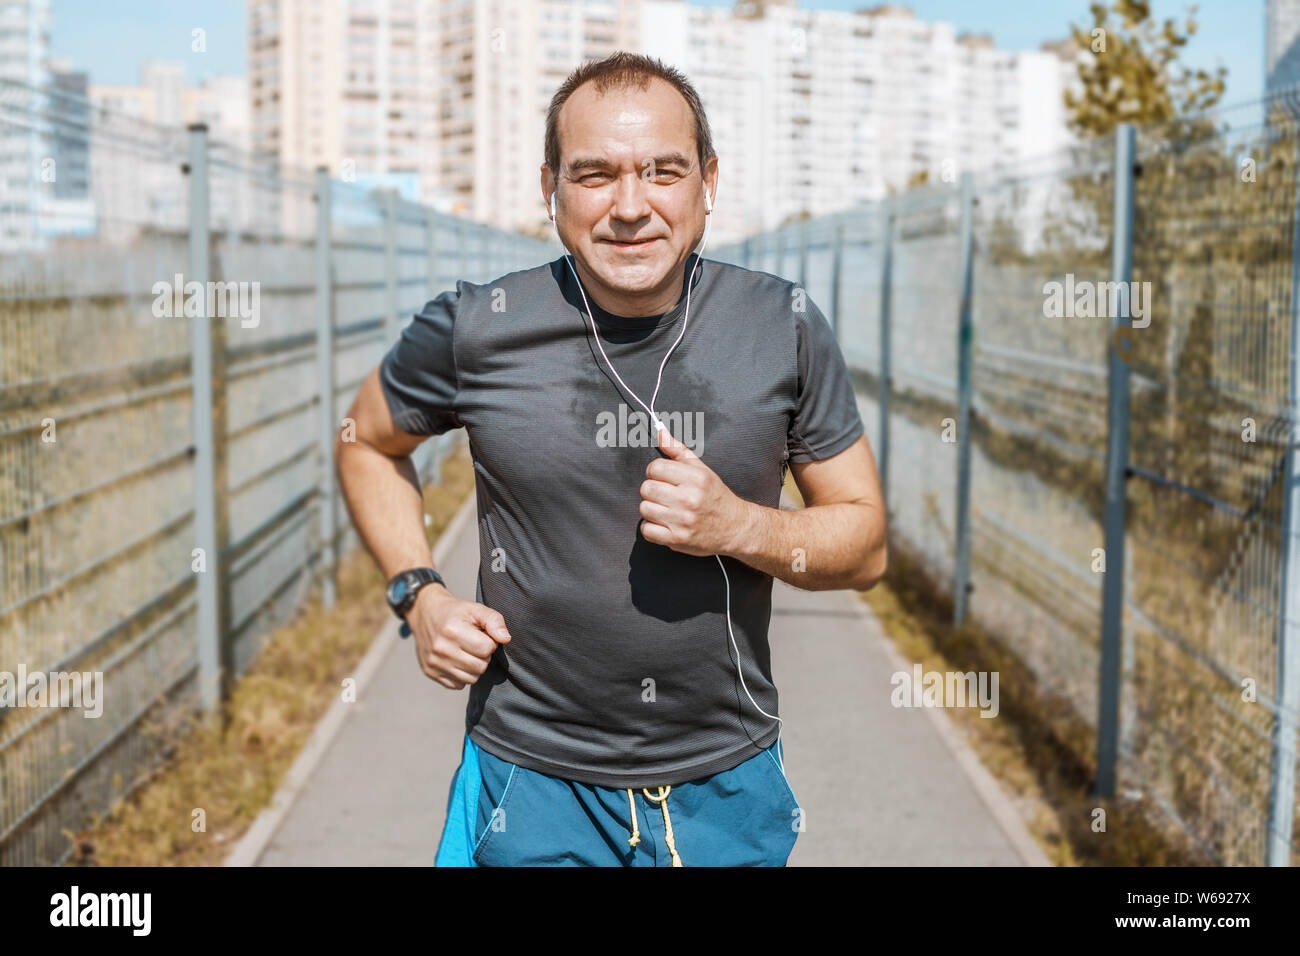 Mature man doing jogging on a city street. Senior man leads a healthy and active lifestyle playing sports. Stock Photo